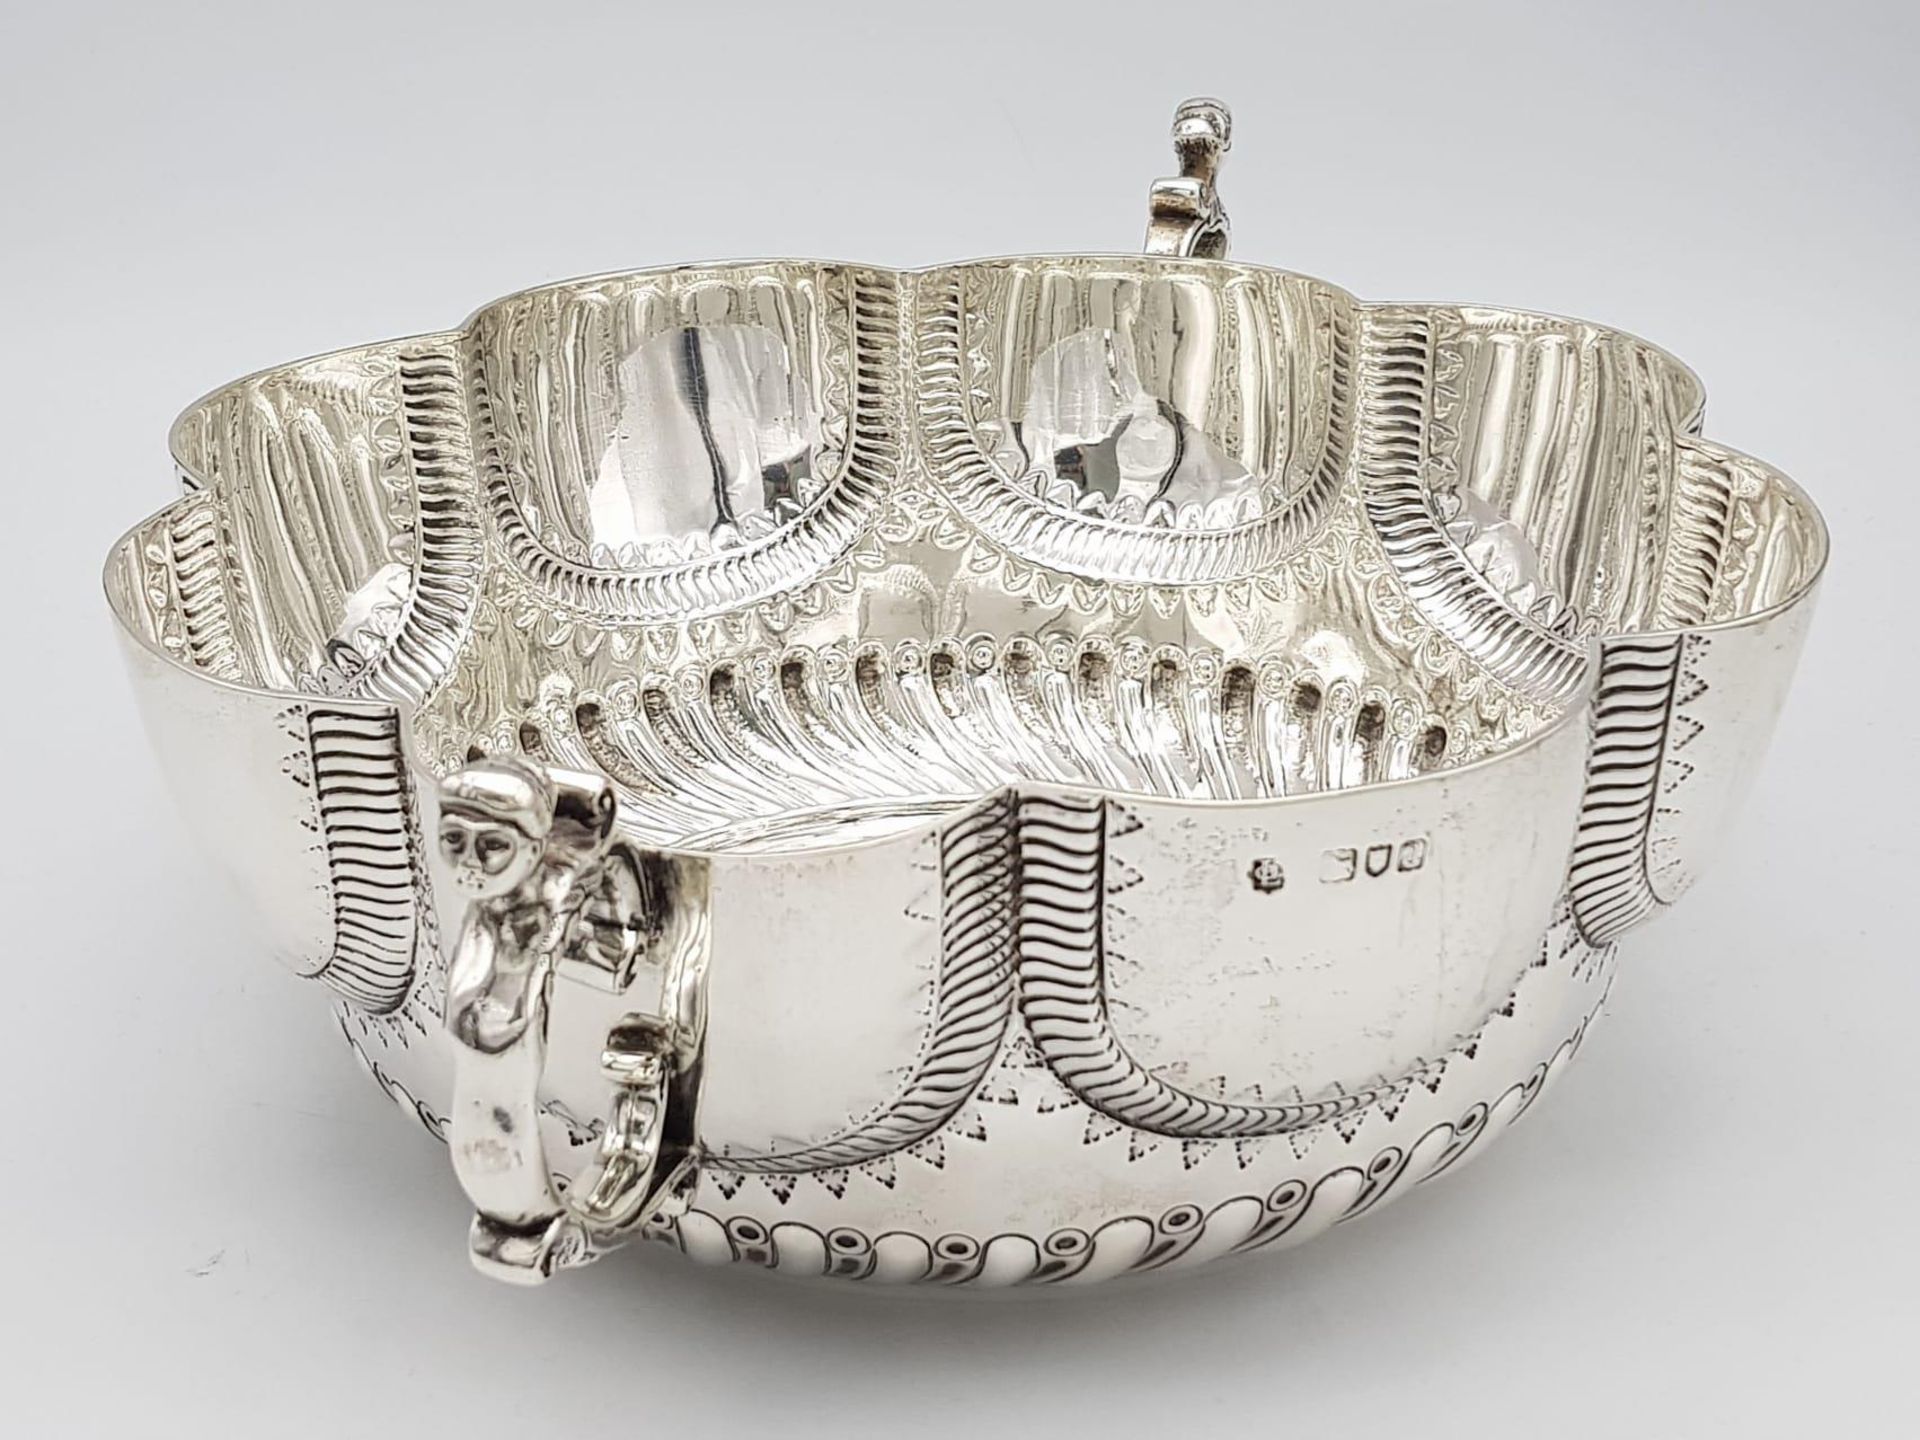 A BEAUTIFULLY ORNATE HAND ENGRAVED SOLID SILVER PUNCH BOWL MADE BY LAMBERT OF COVENTRY STREET , - Image 2 of 7